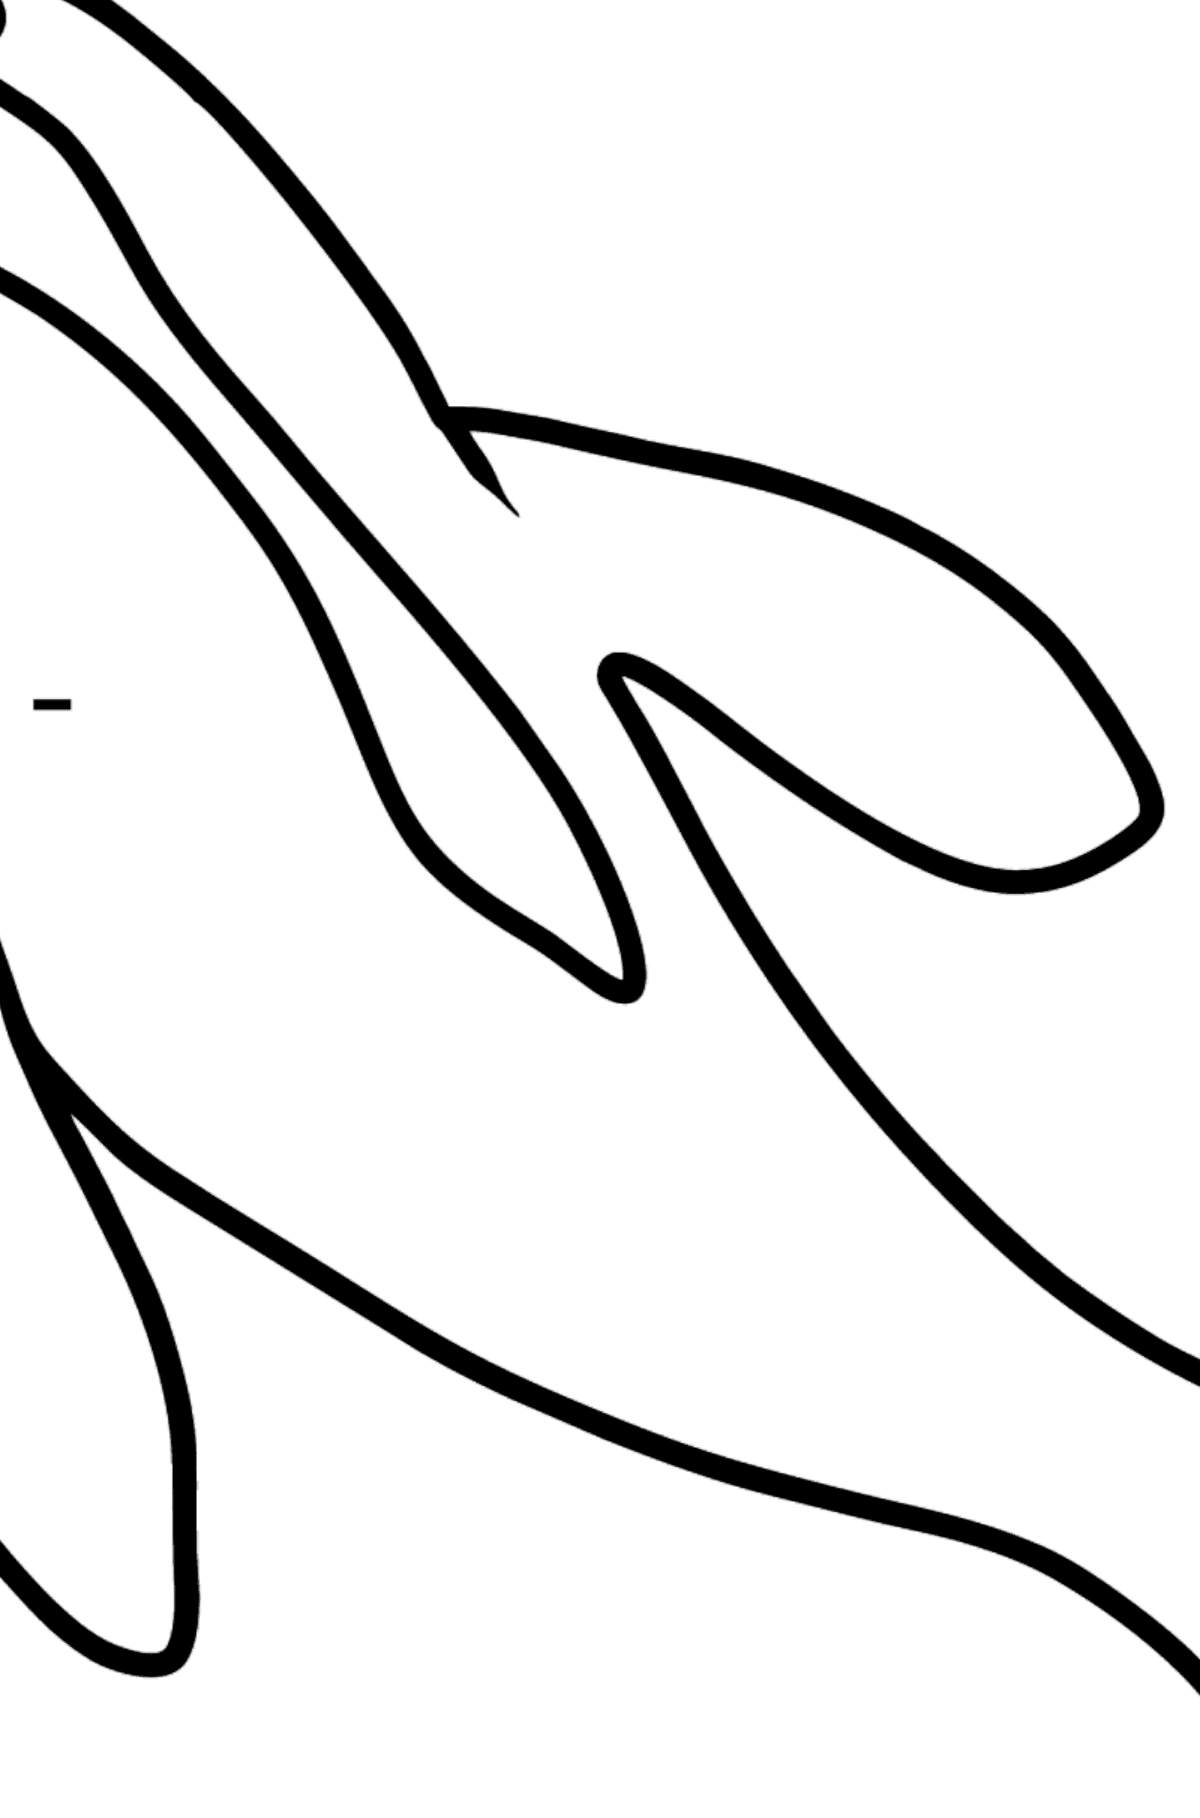 Dolphin coloring page - Coloring by Symbols for Kids